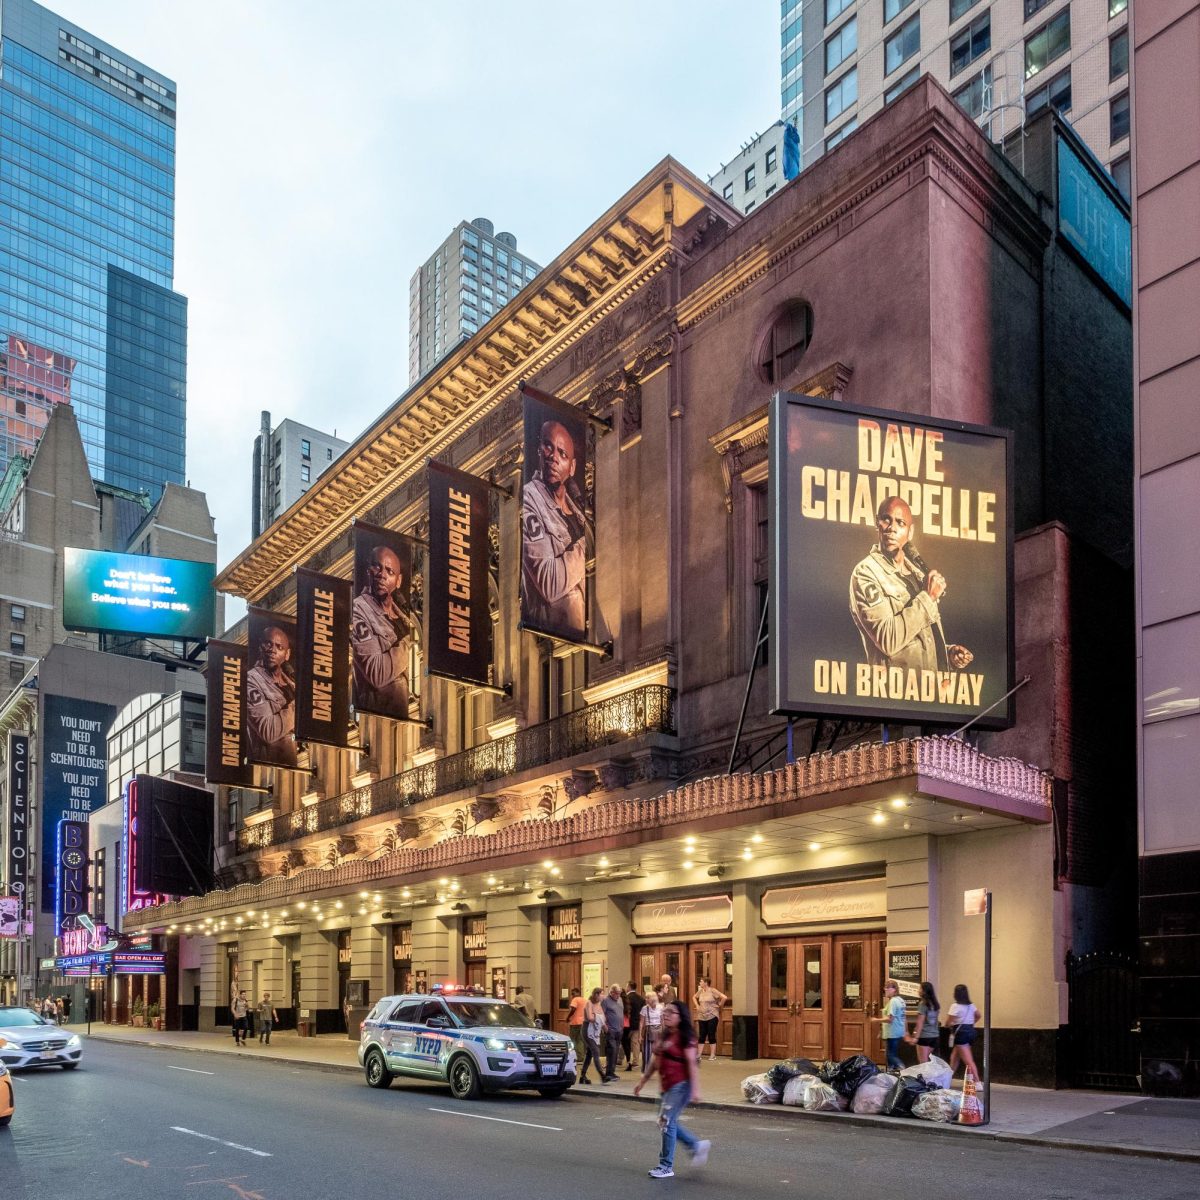 Currently running at the Lunt-Fontanne Theatre, “Sweeney Todd” stars Josh Groban as the titular murderous barber and Annaleigh Ashford as Mrs. Lovett. 